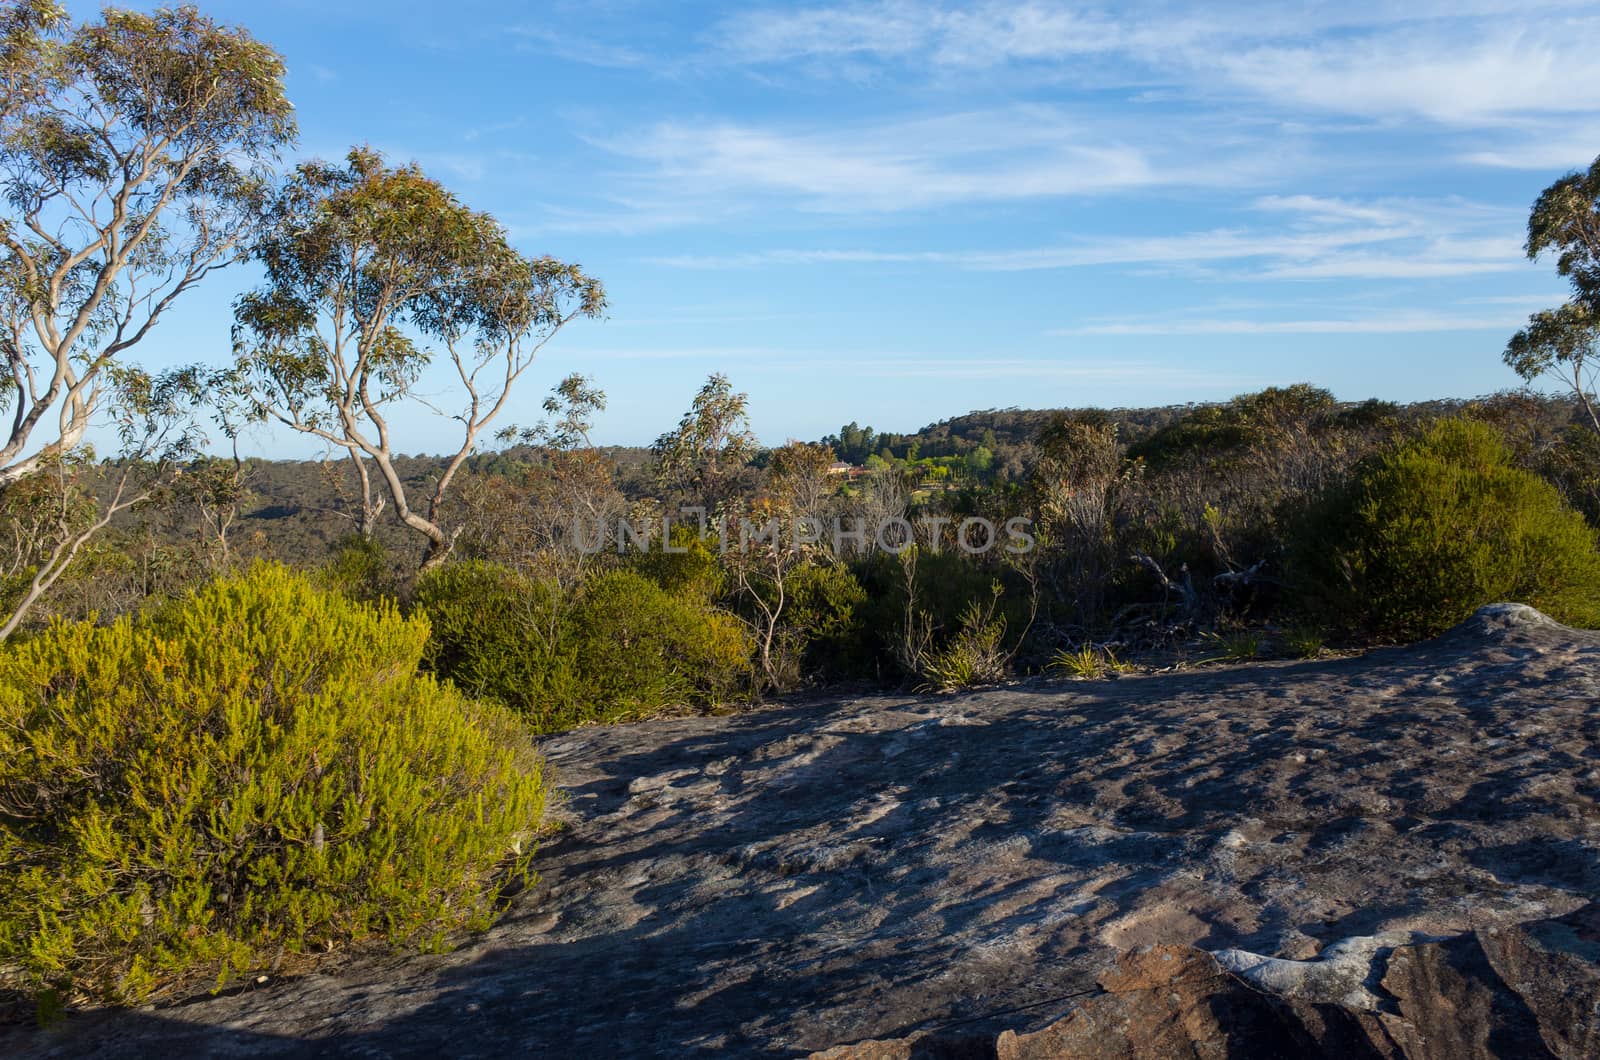 Eucalyptus trees with a large rock in the foreground and a thick eucalyptus forest in the background. Blue Mountains, Australia.